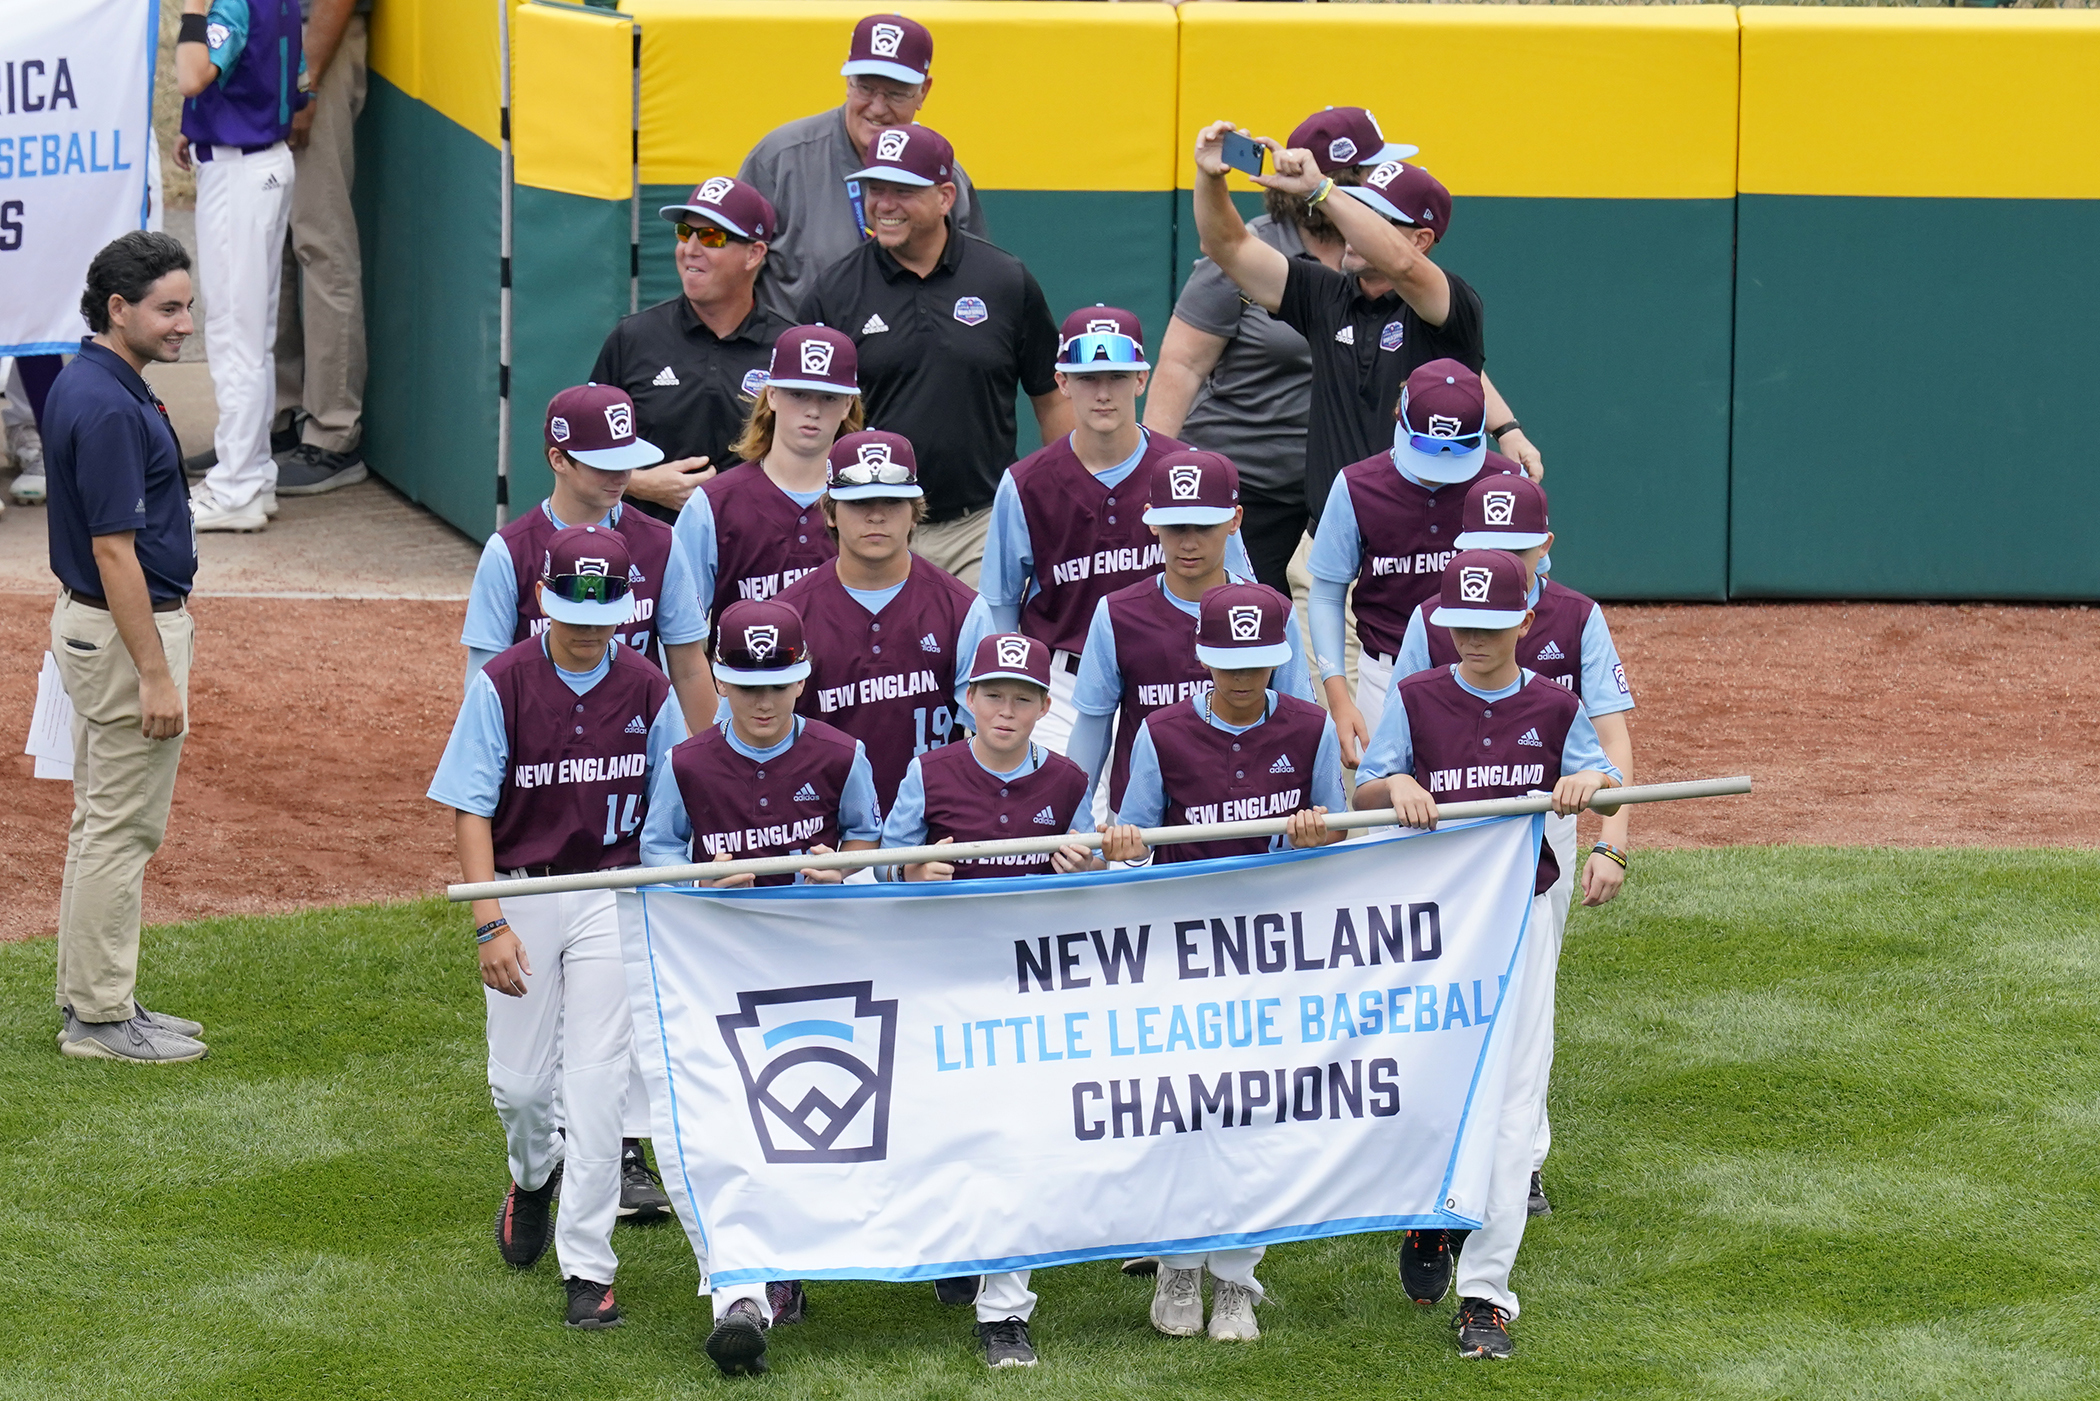 Middleboro to represent New England in Little League World Series